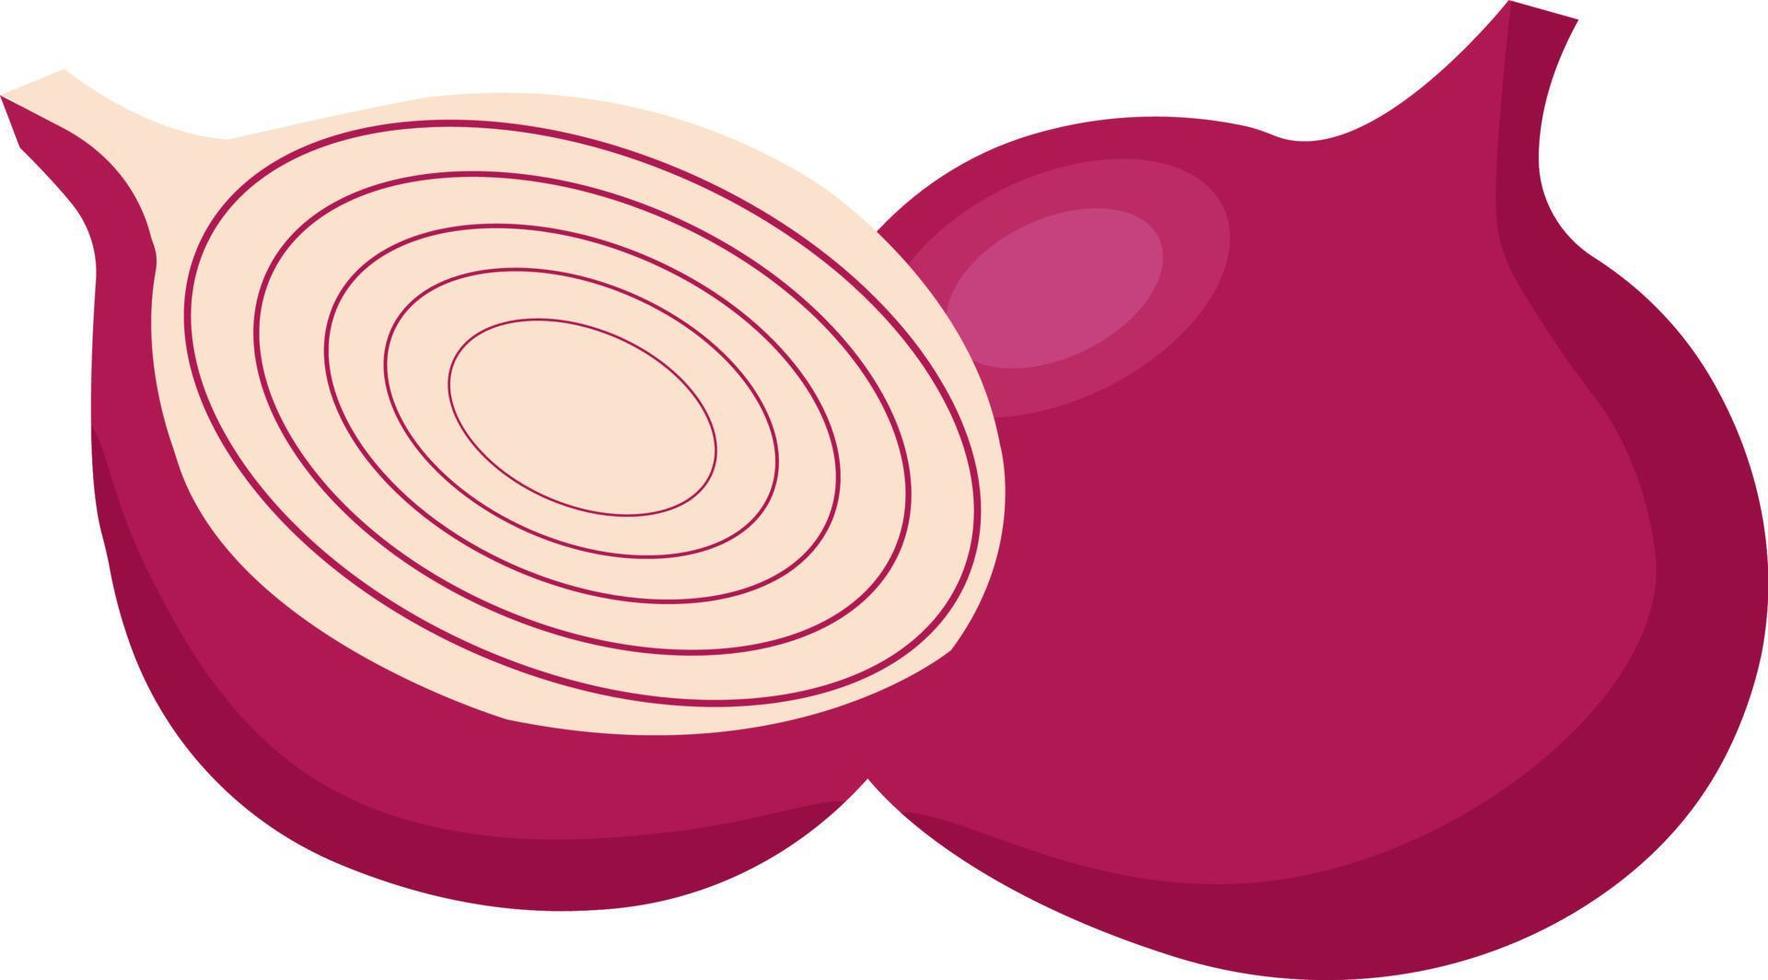 Red onion, illustration, vector on white background.